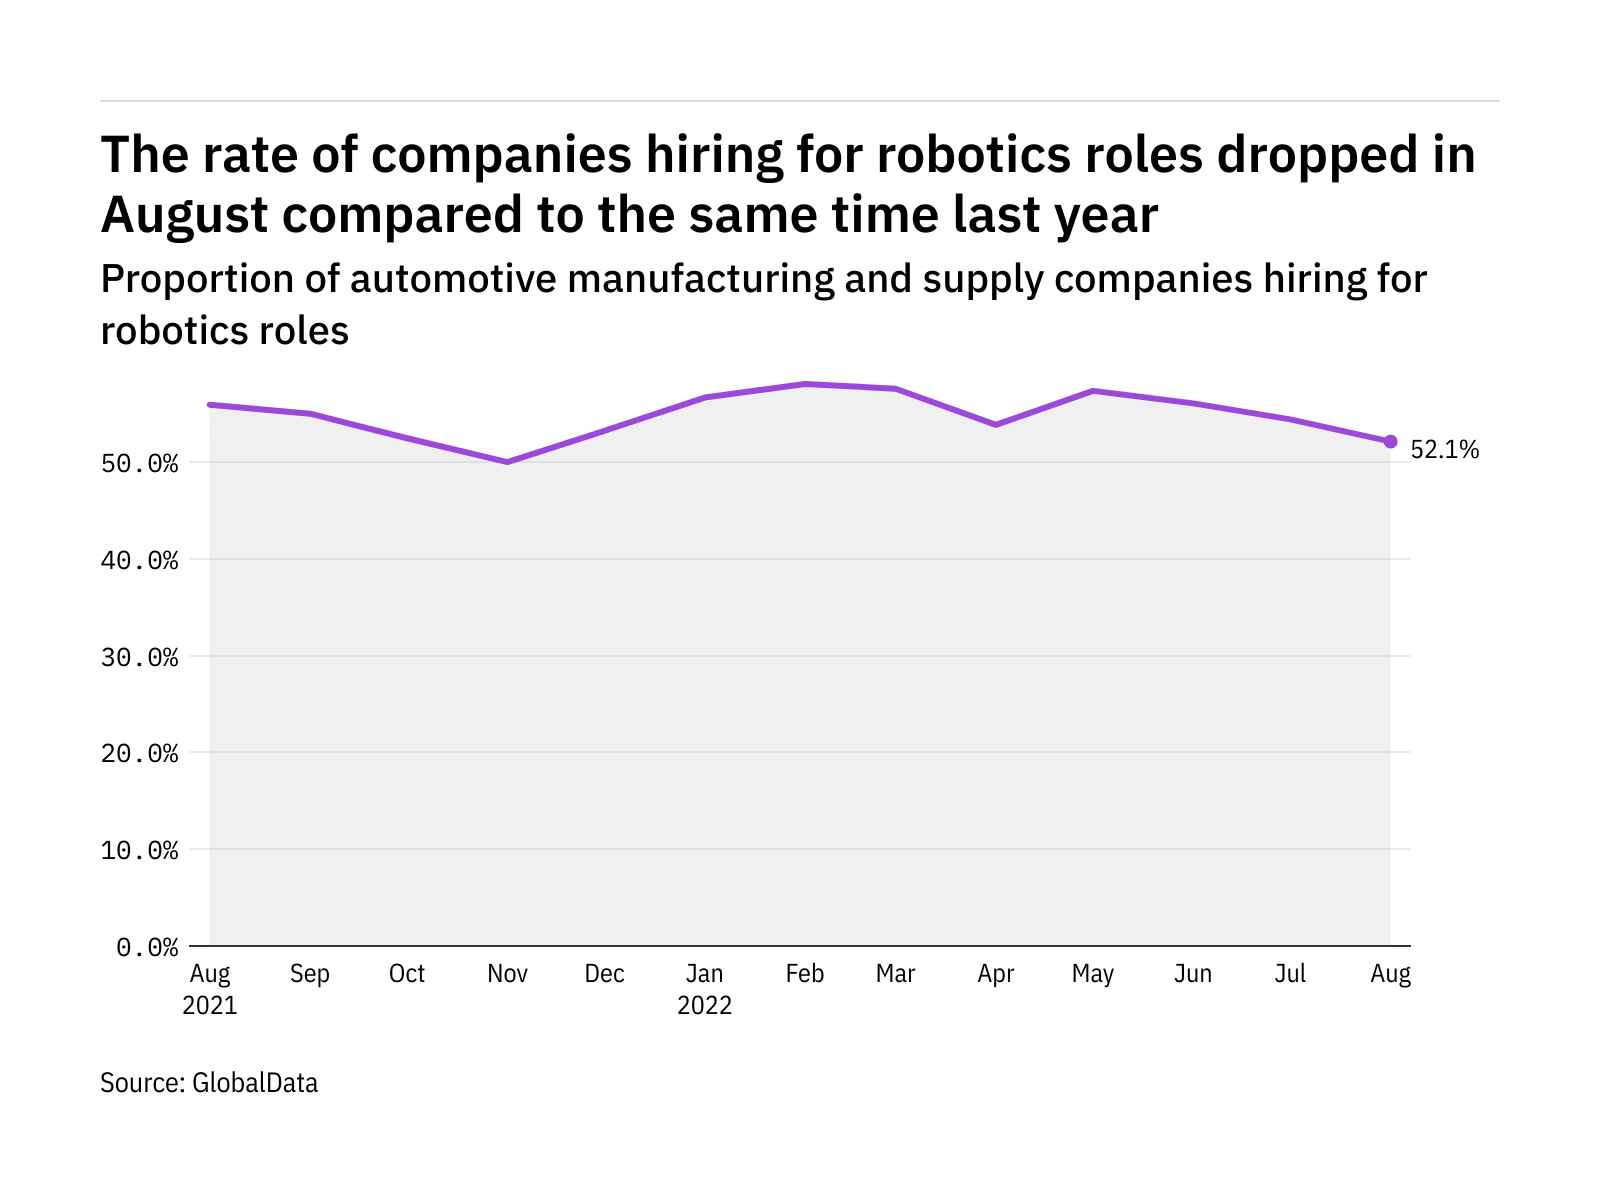 Robotics hiring levels in the automotive industry dropped in August 2022